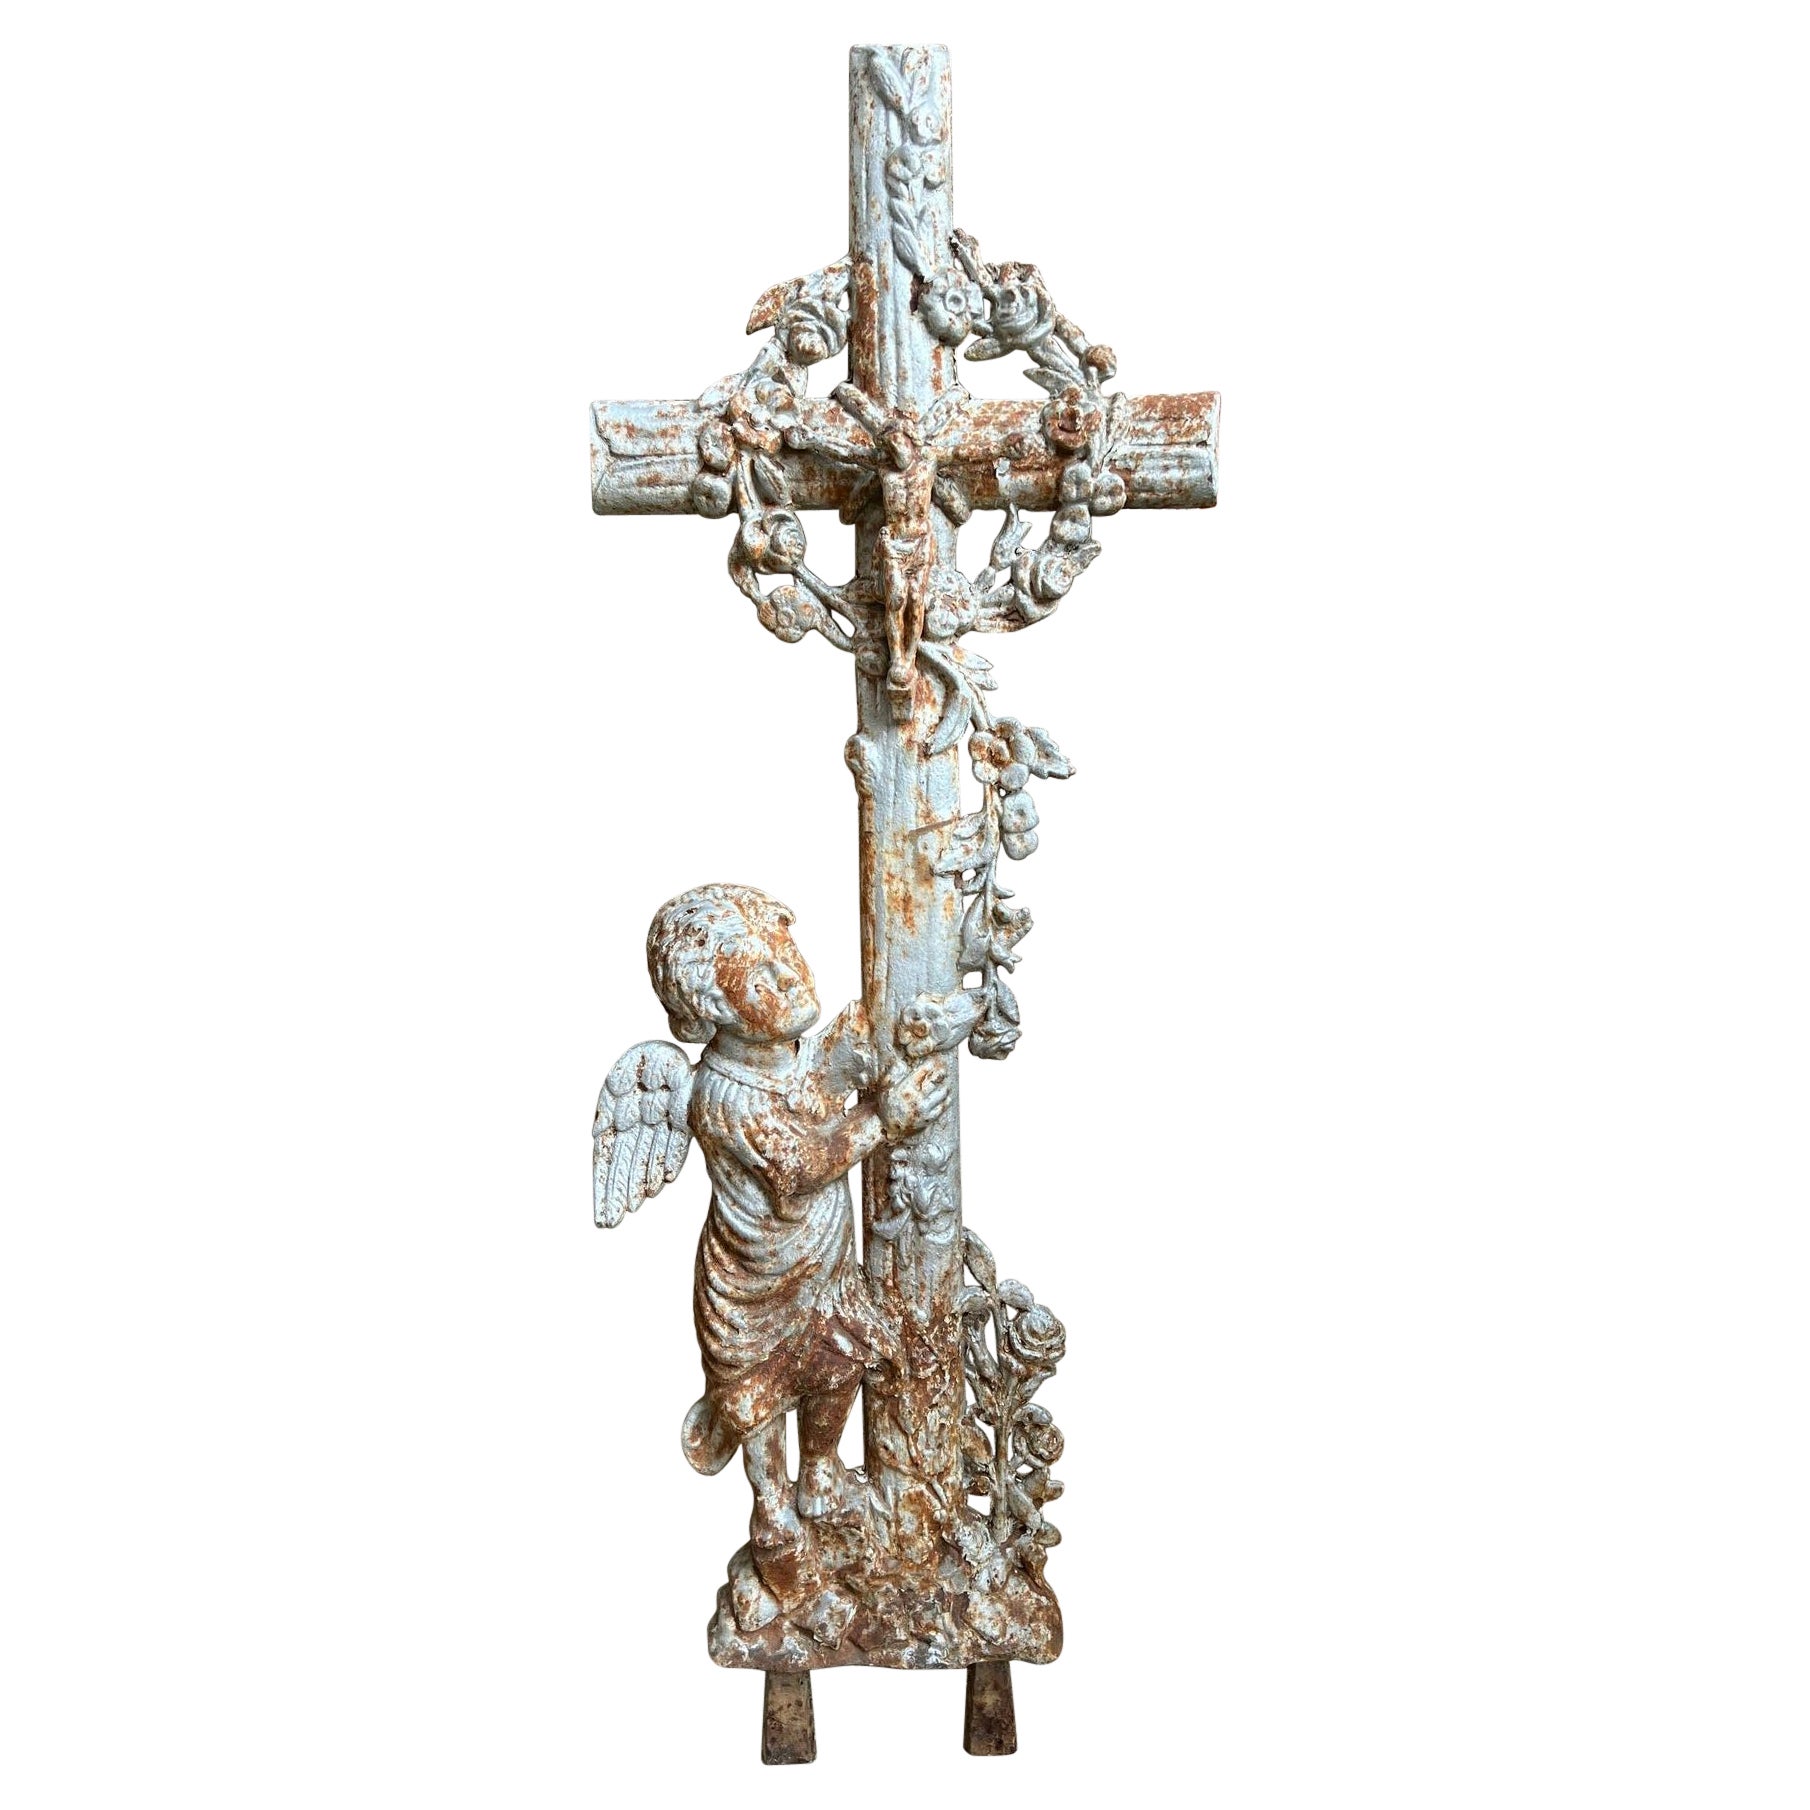 SMALL Antique French Cast Iron Cemetery Cross Crucifix Child Angel Garden Chapel For Sale